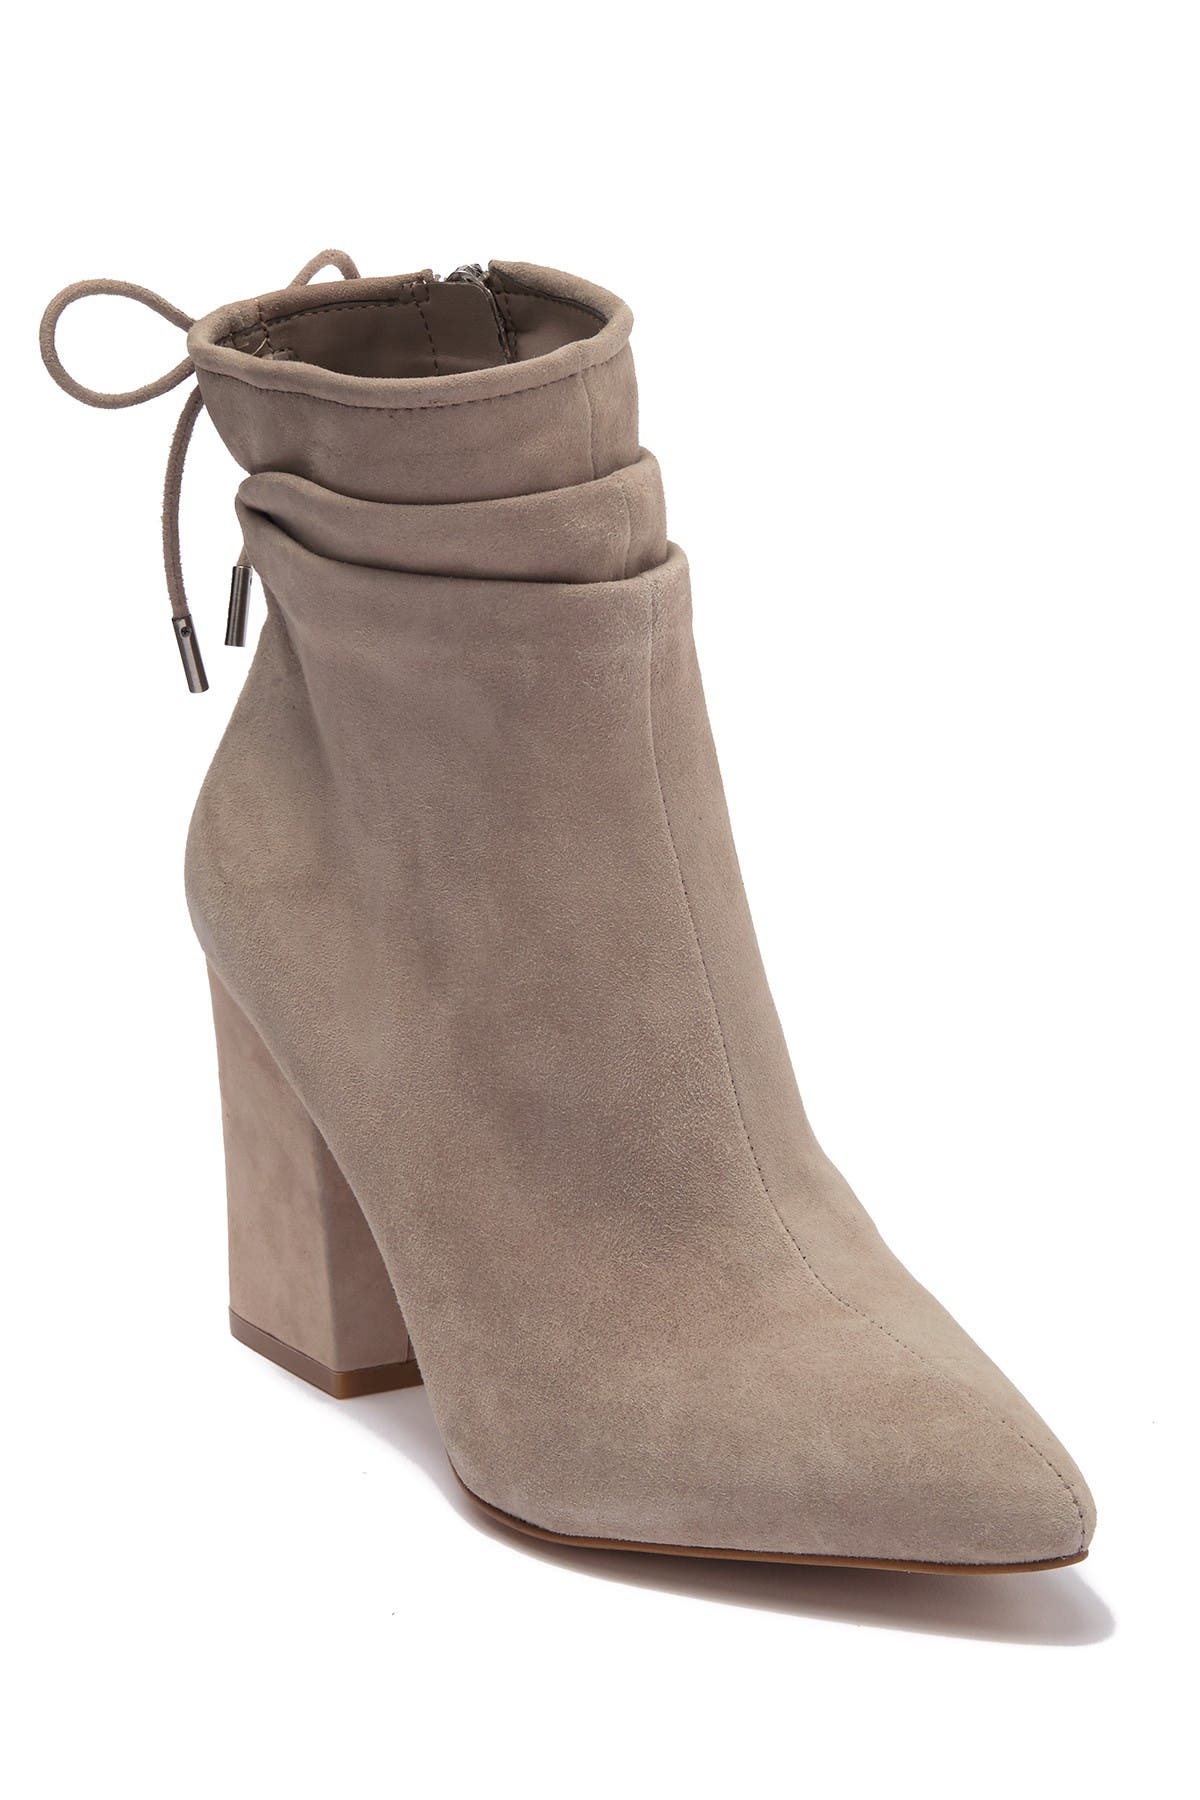 Vince Camuto | Salai Slouch Bootie 